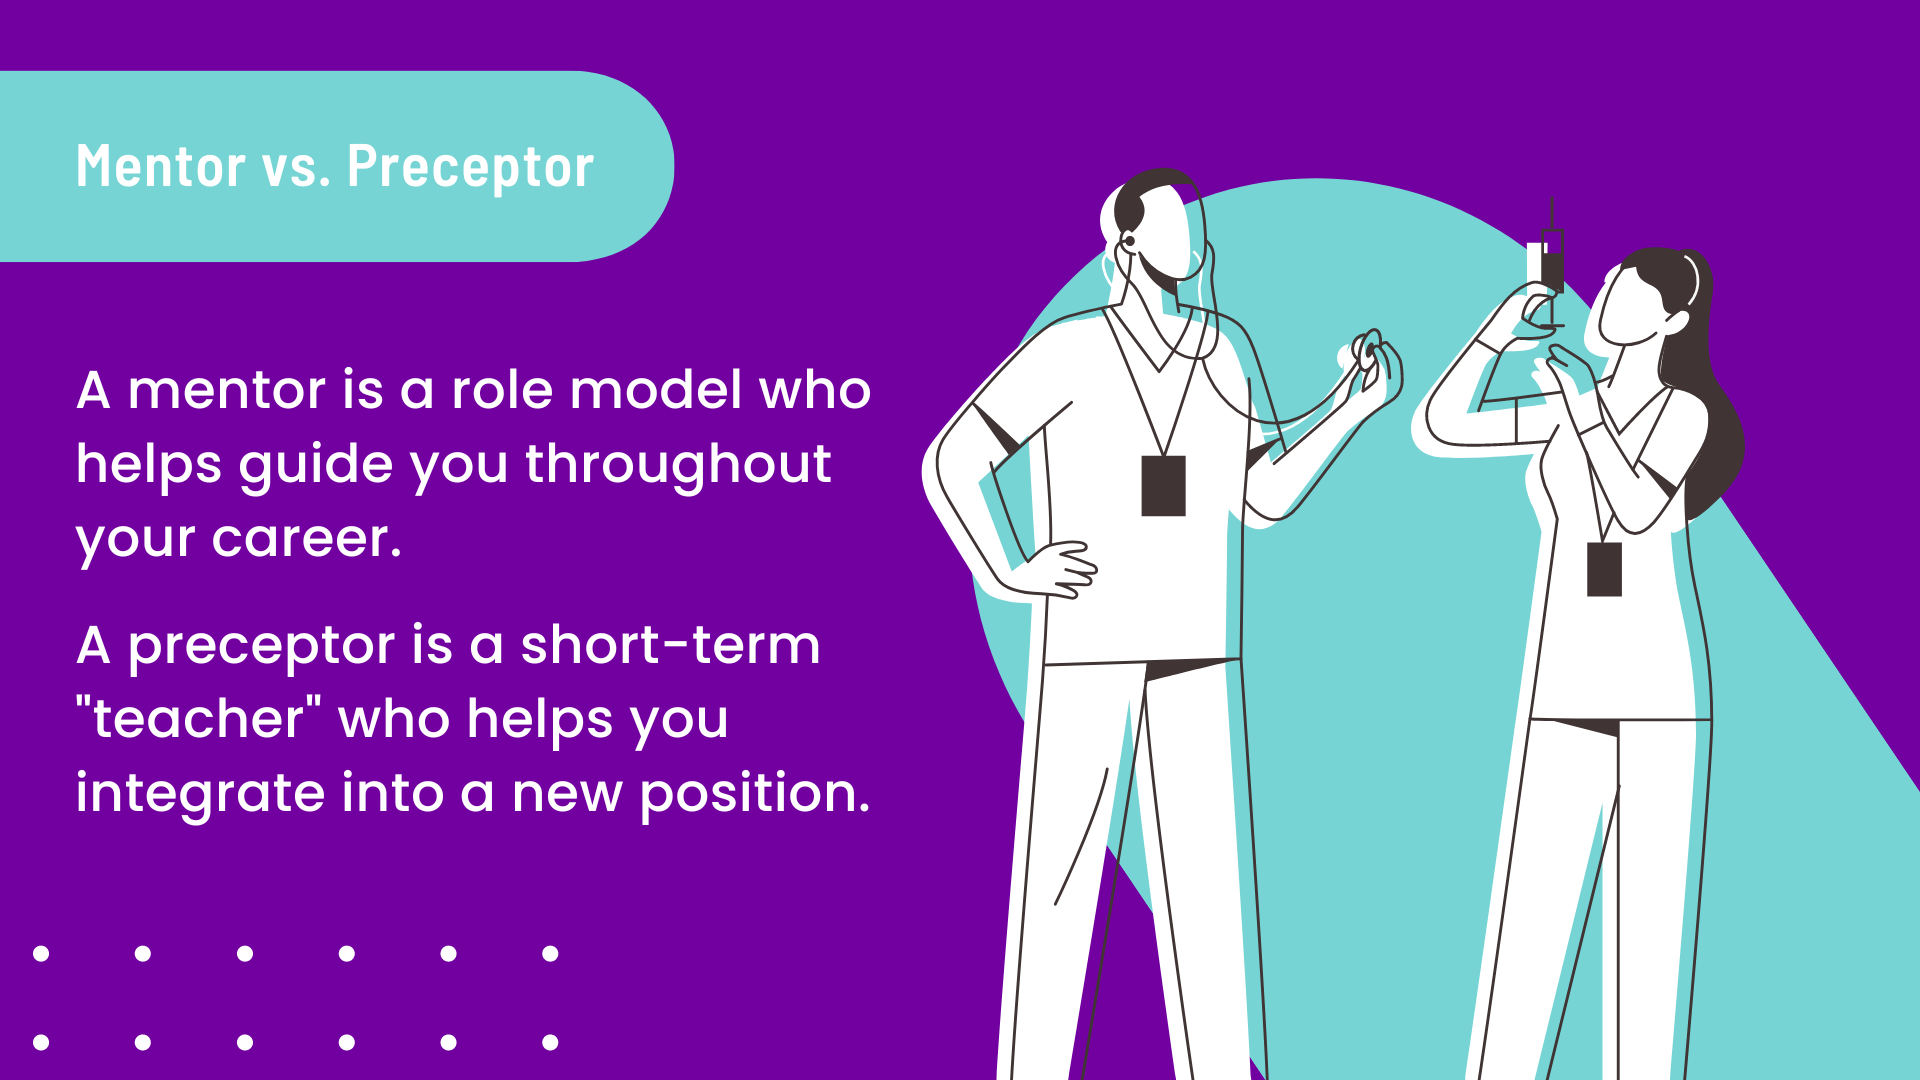 Illustration that explains how a mentor is a role model who helps guide you through your career, and a preceptor is a short-term "teacher" who helps you integrate into a new position.